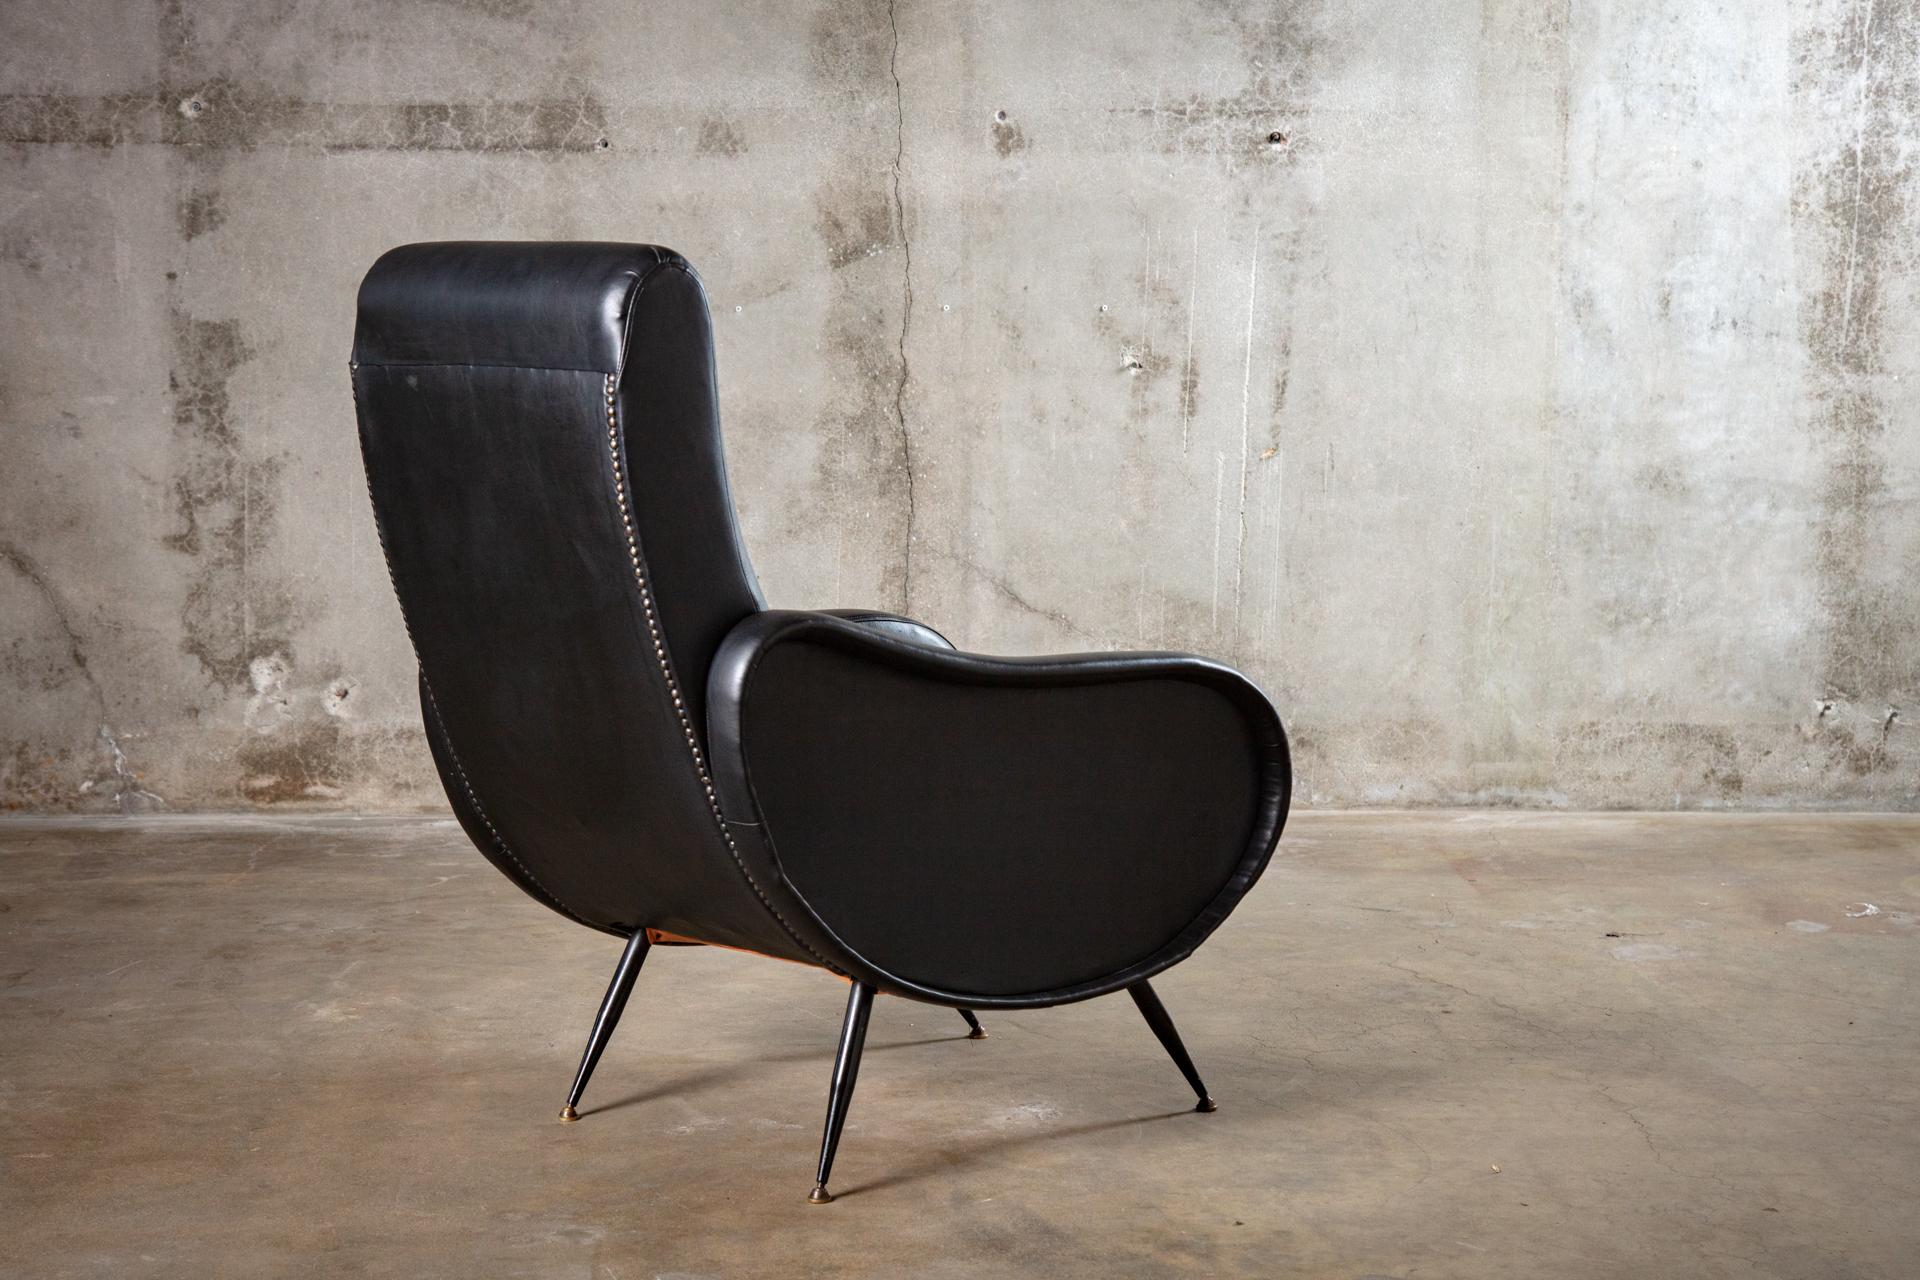 Pair of Marco Zanuso club chairs with iron upholstered in black leather, circa 1950.